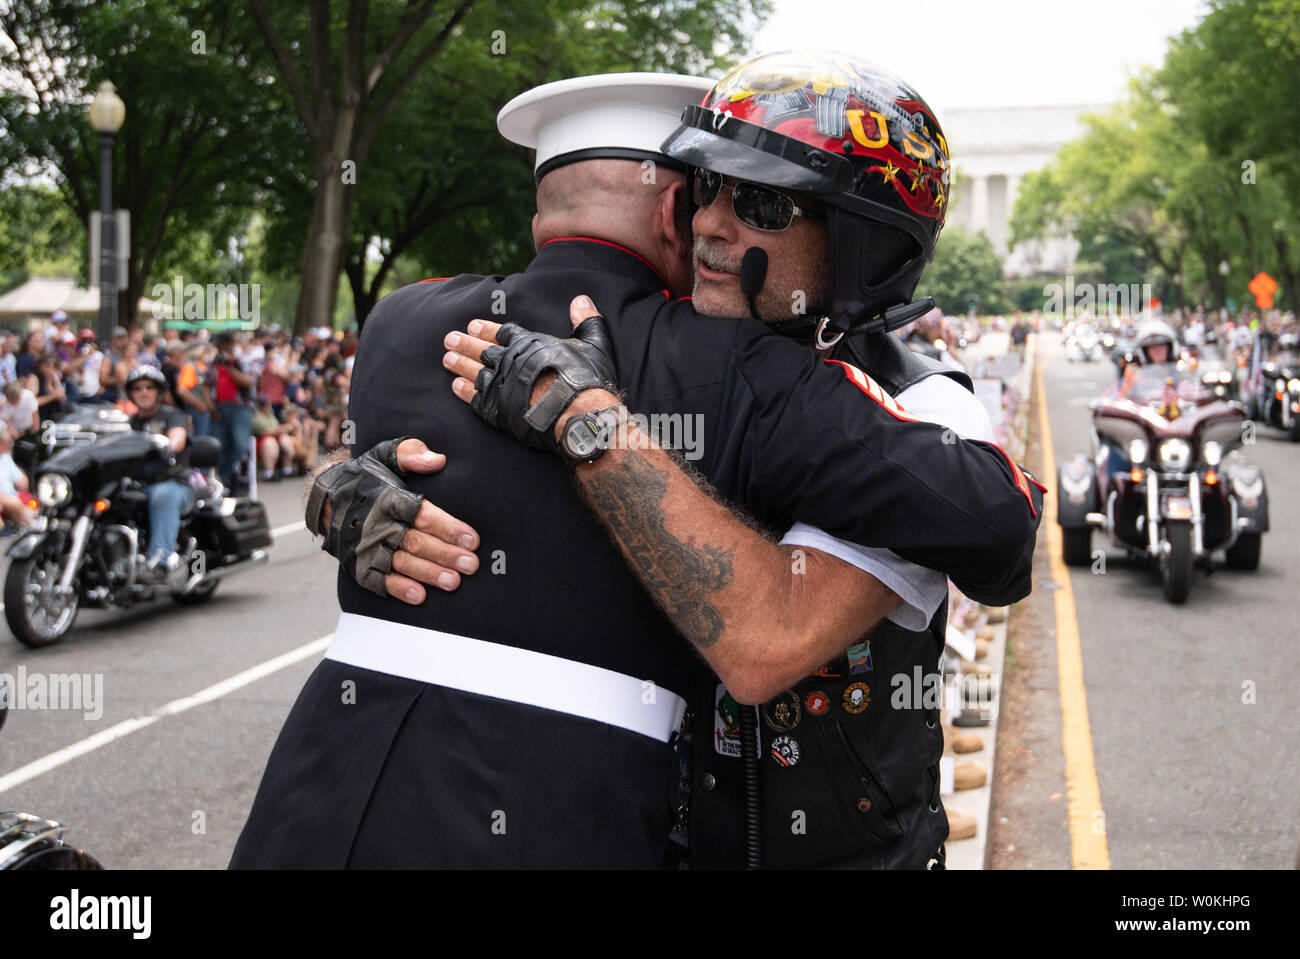 A motorcyclist hugs USMC SSGT Tim Chambers during Rolling Thunder, the annual Memorial Day weekend motorcycle rally for veterans, prisoners of war and service members that draws hundreds of thousands of